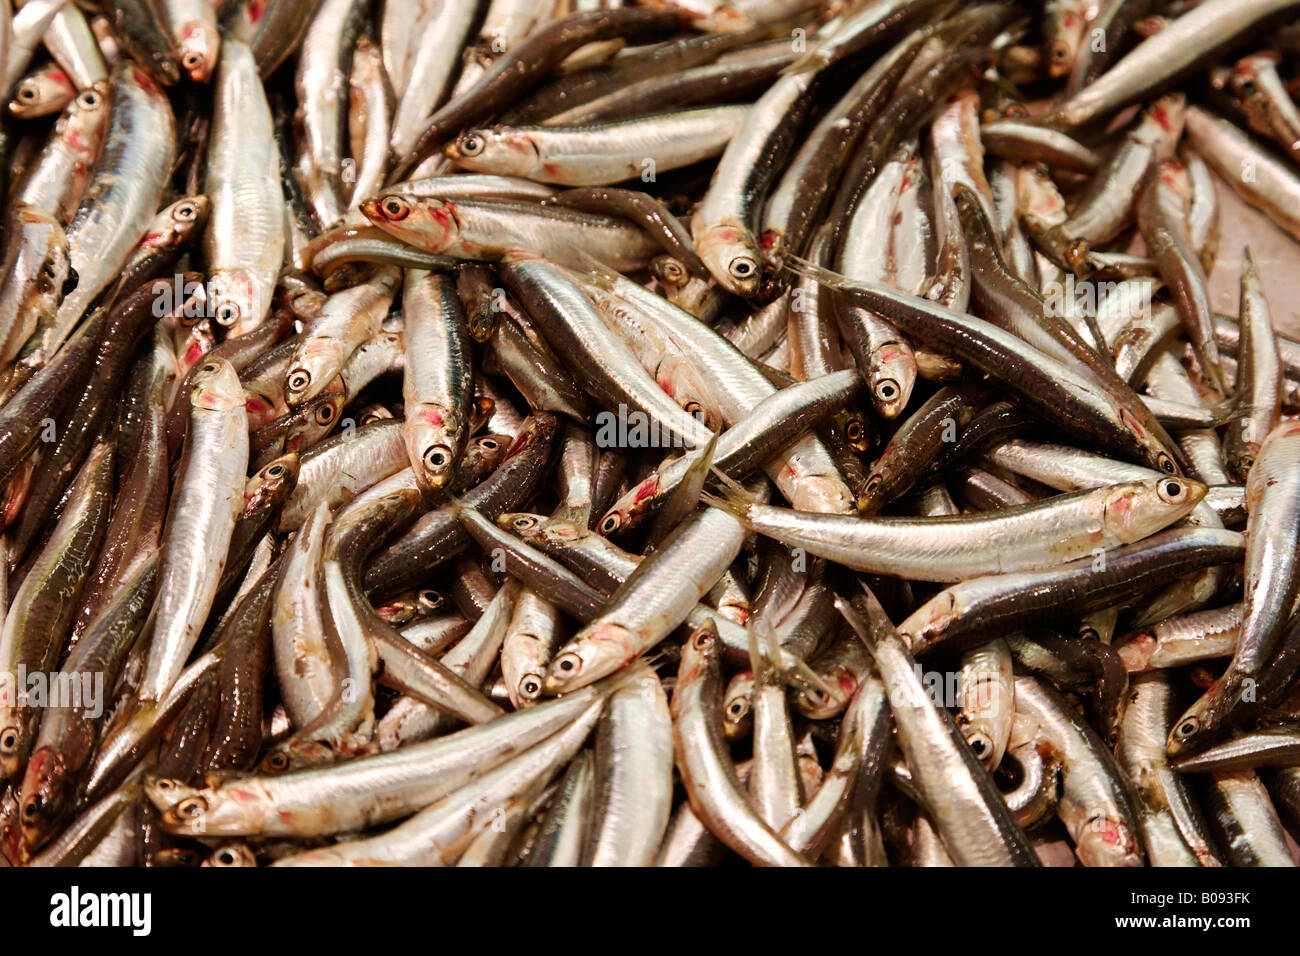 Fish sold at a market in Majorca, Balearic Islands, Spain Stock Photo